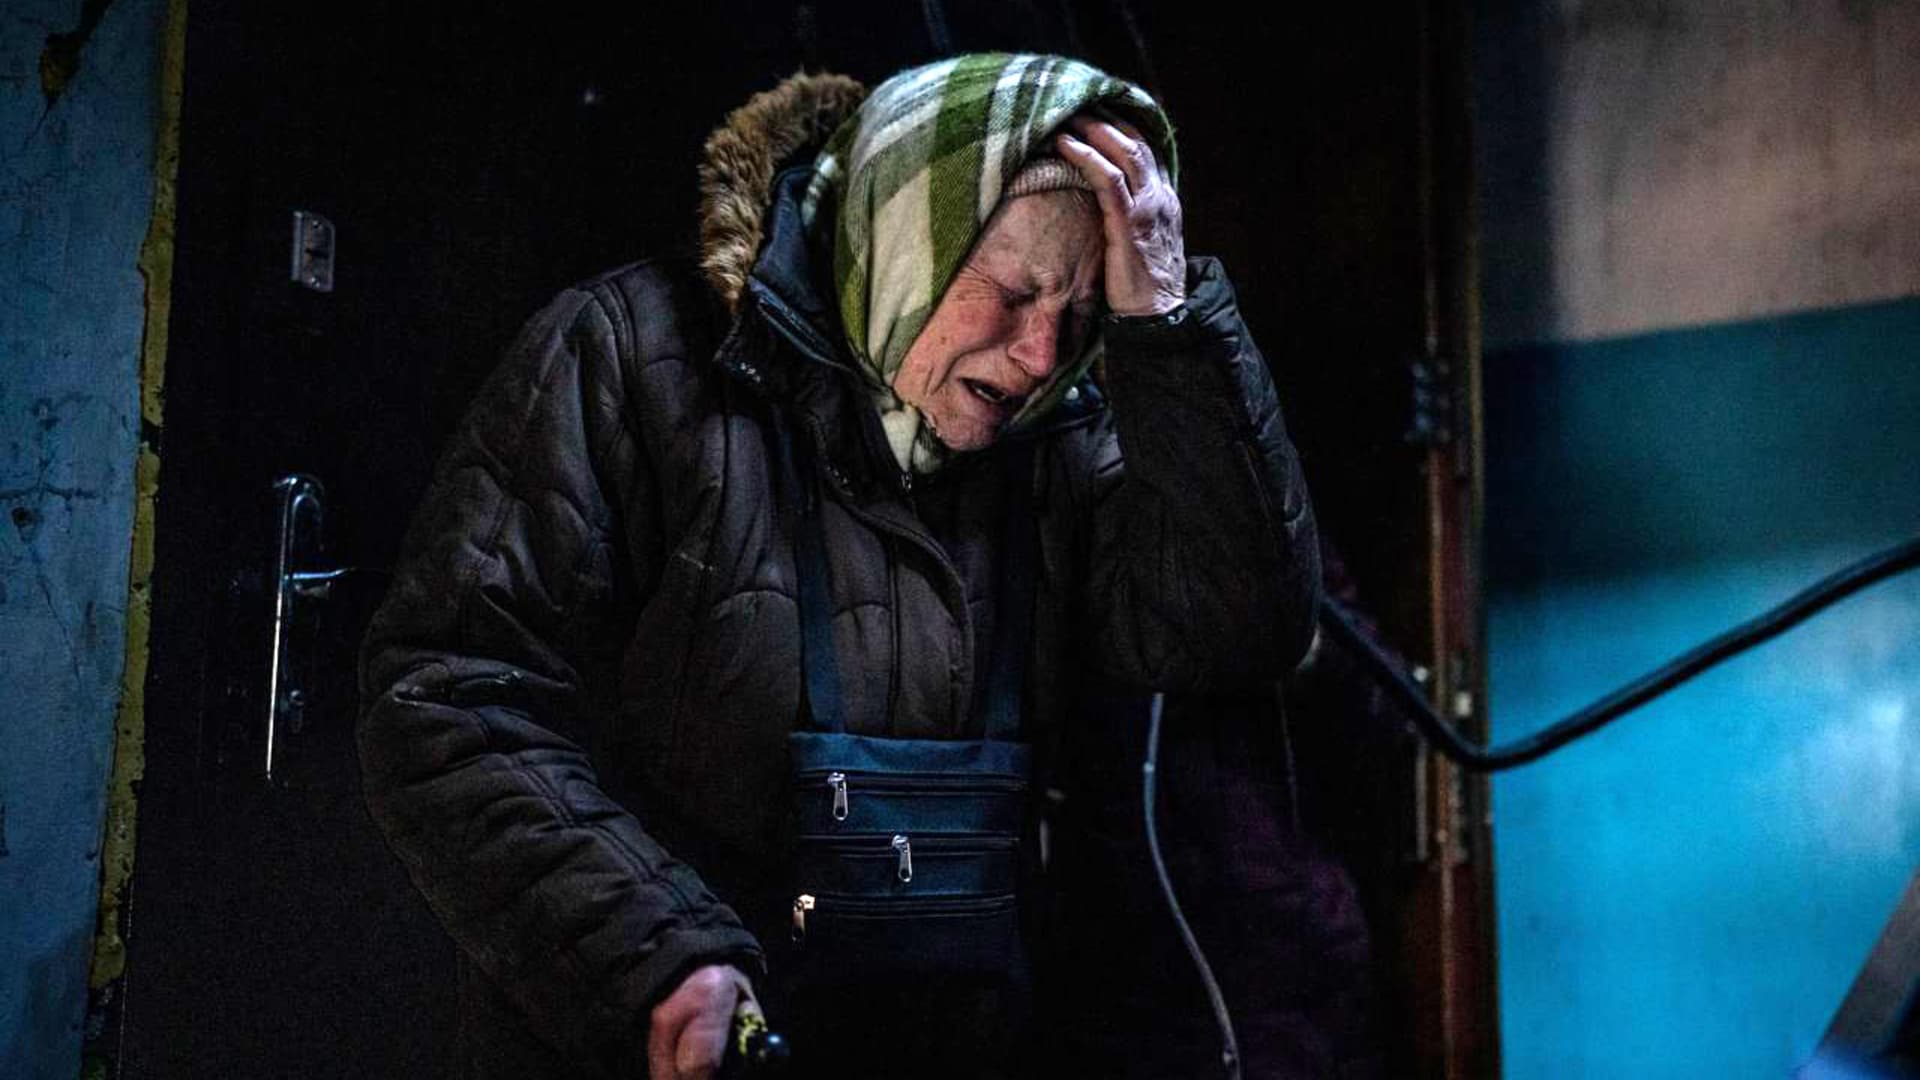 Portraits of war: See how the attack on Ukraine has affected its people